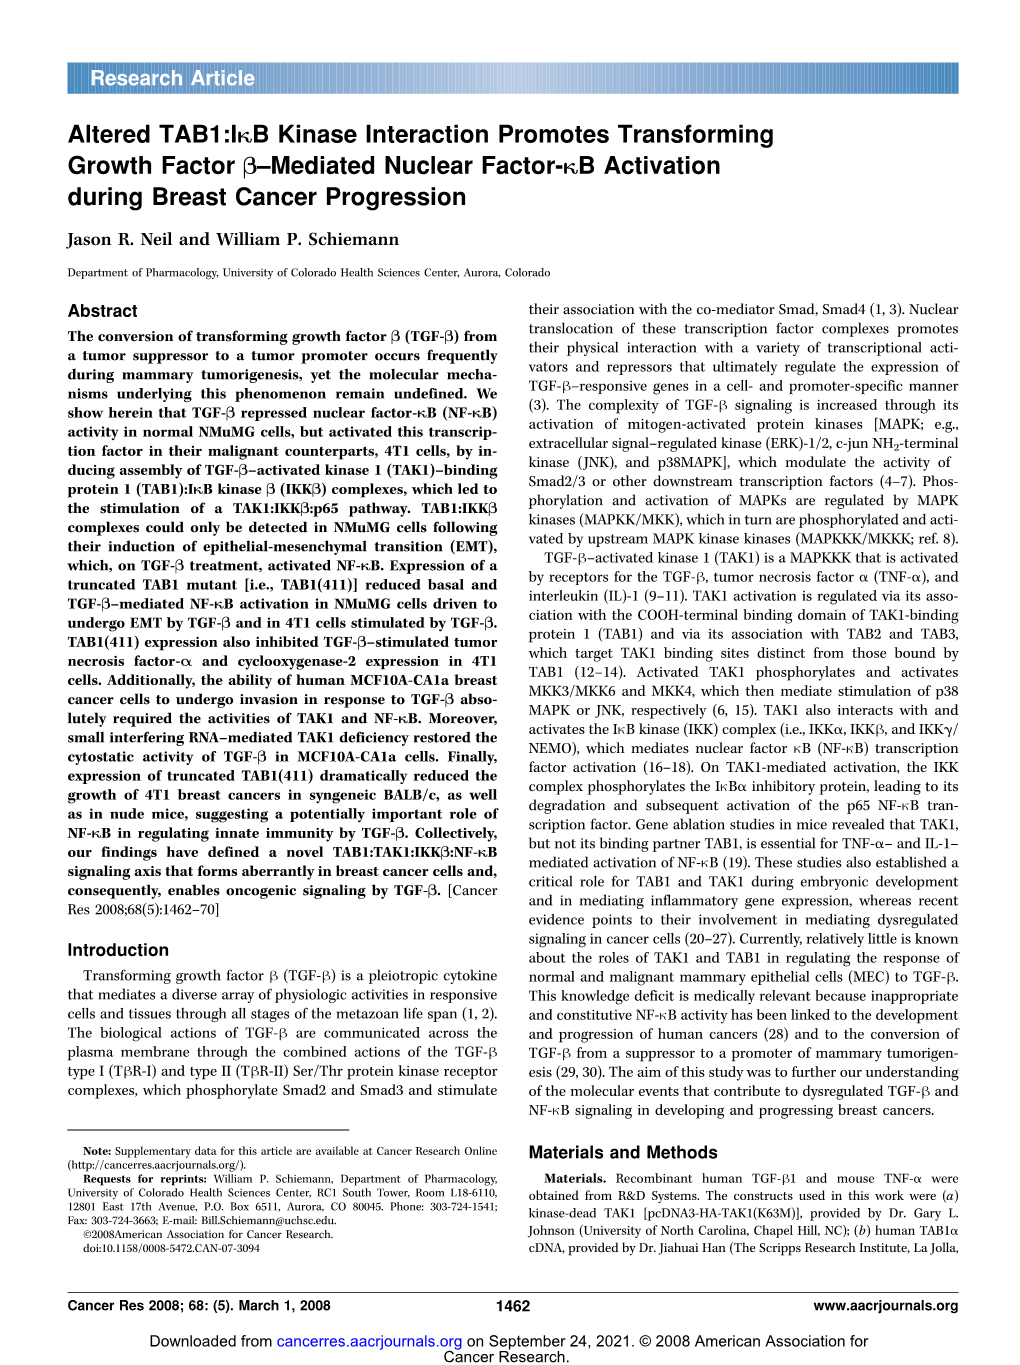 Altered TAB1:IKB Kinase Interaction Promotes Transforming Growth Factor B–Mediated Nuclear Factor-KB Activation During Breast Cancer Progression Jason R